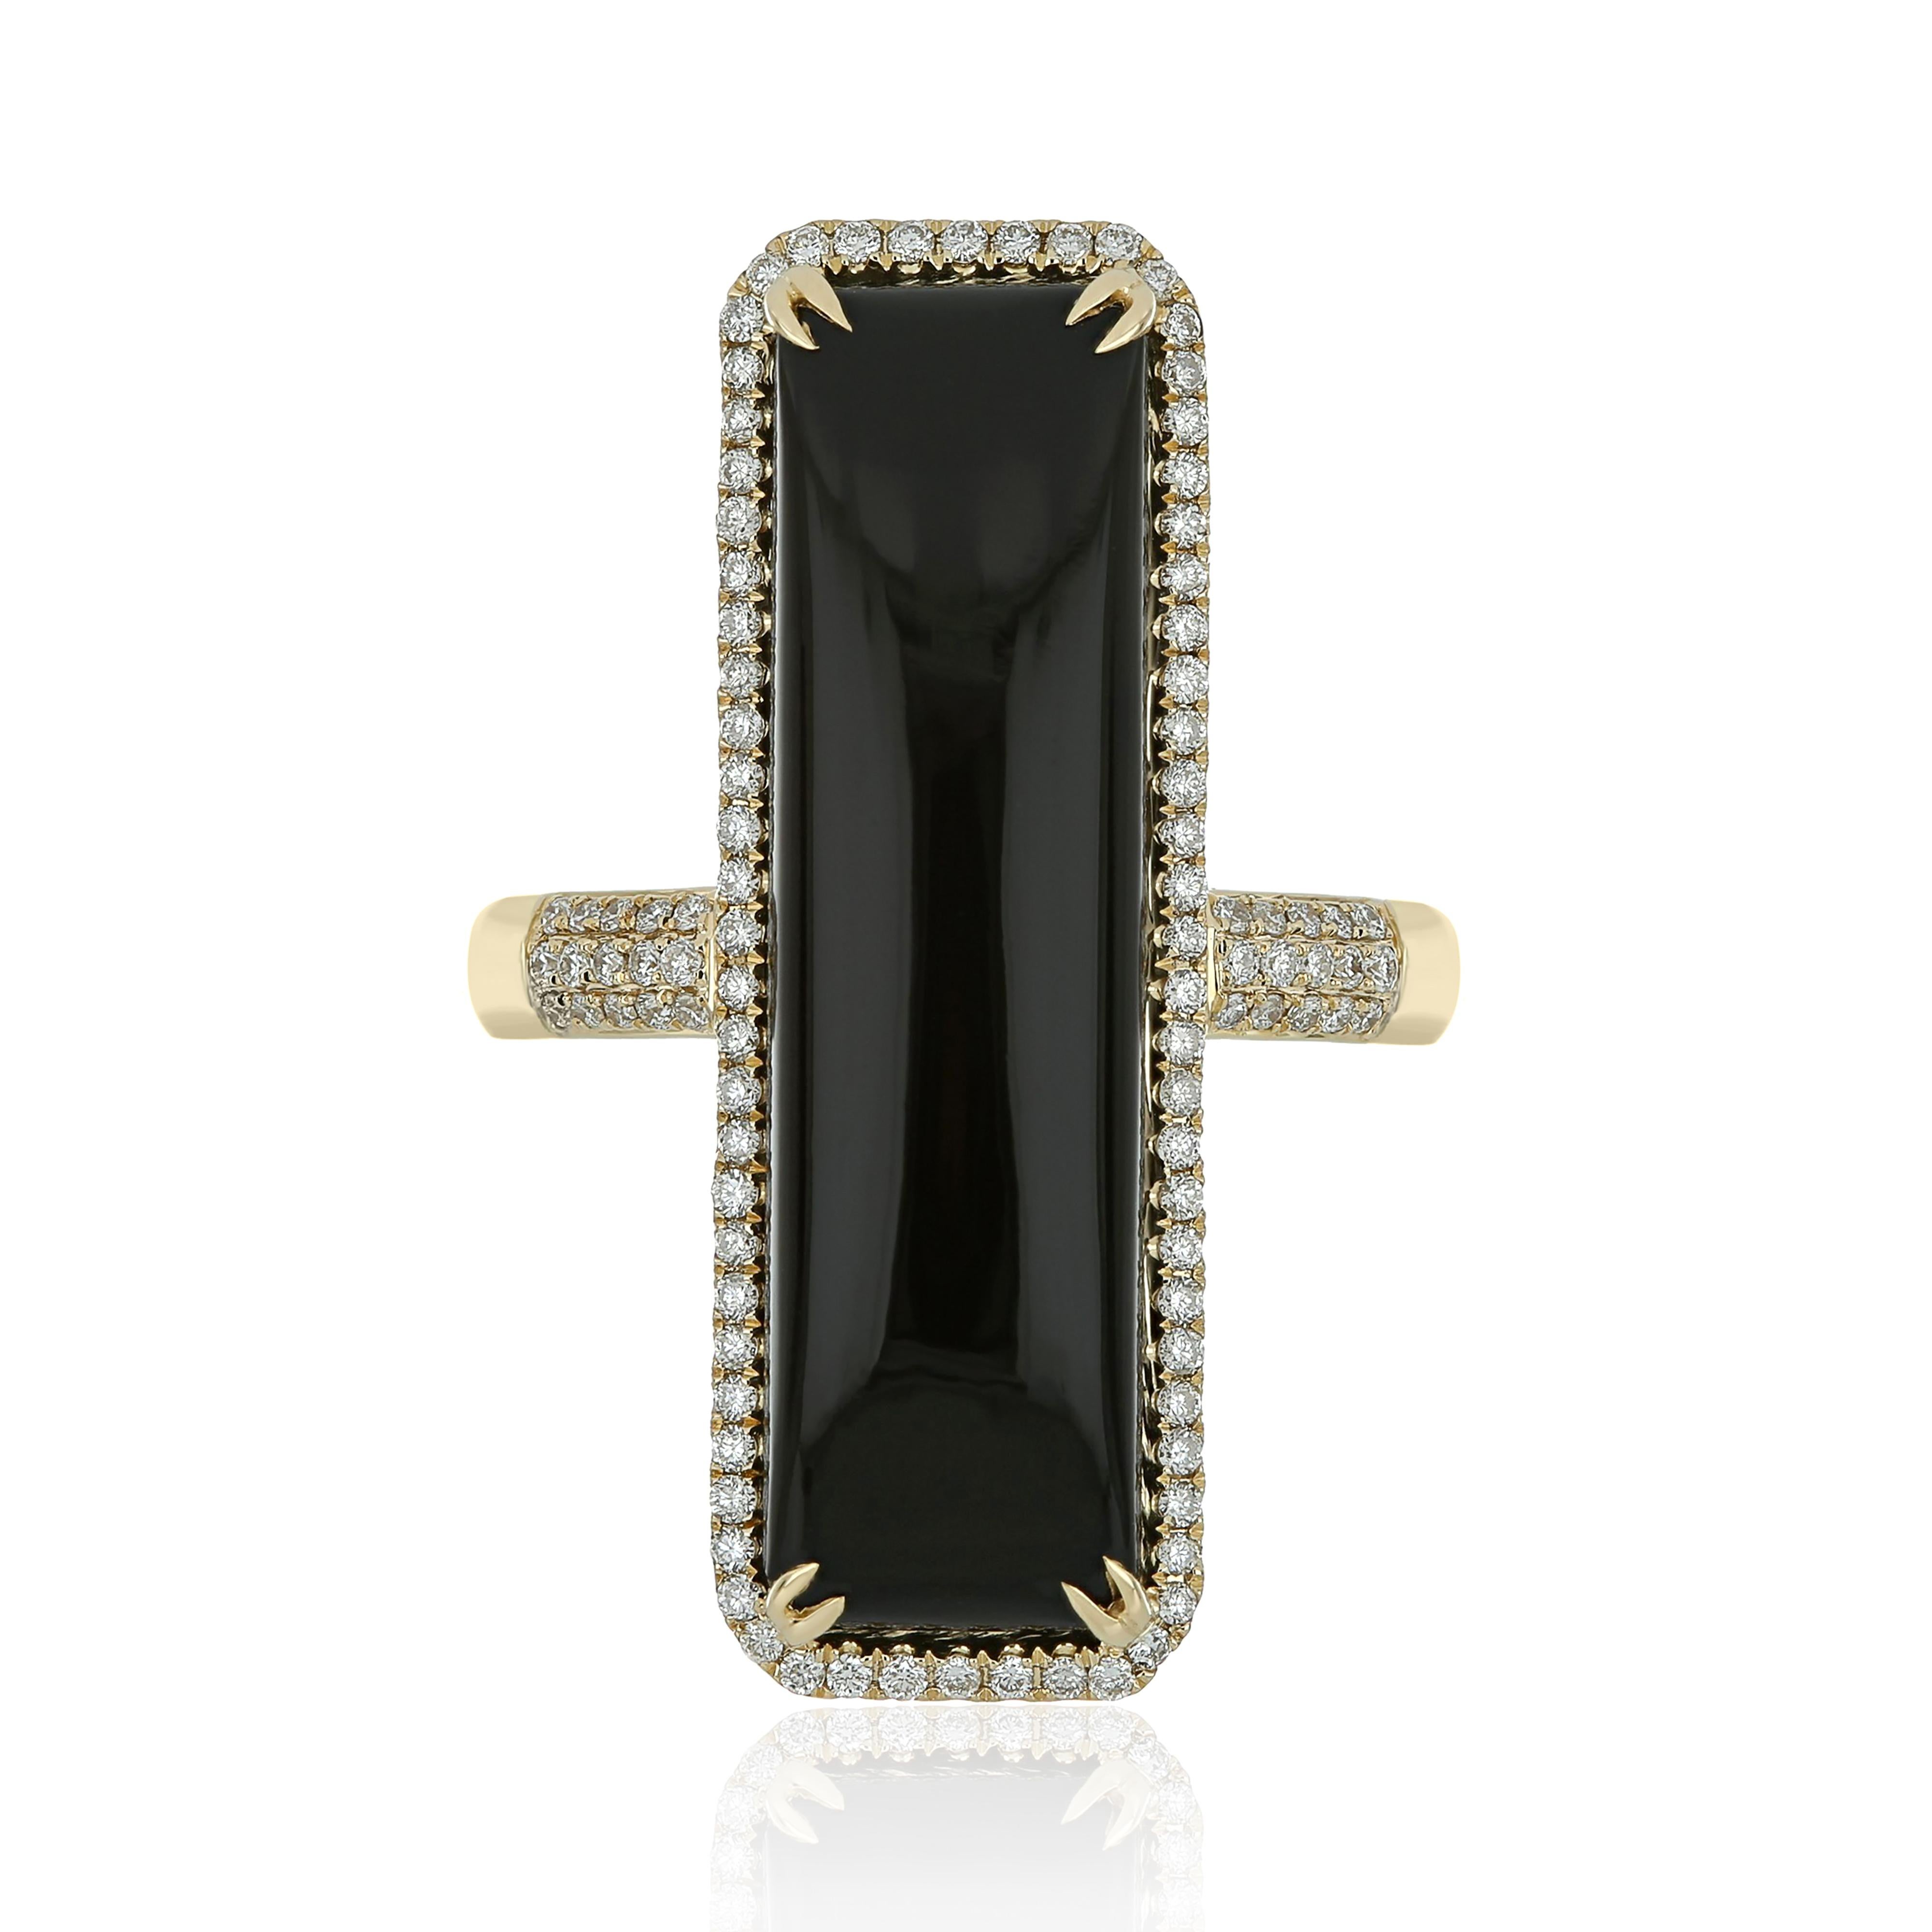 For Sale:  Black Onyx and Diamond Ring 14 Karat Yellow Gold Handcraft Jewelry Ring For Gift 2